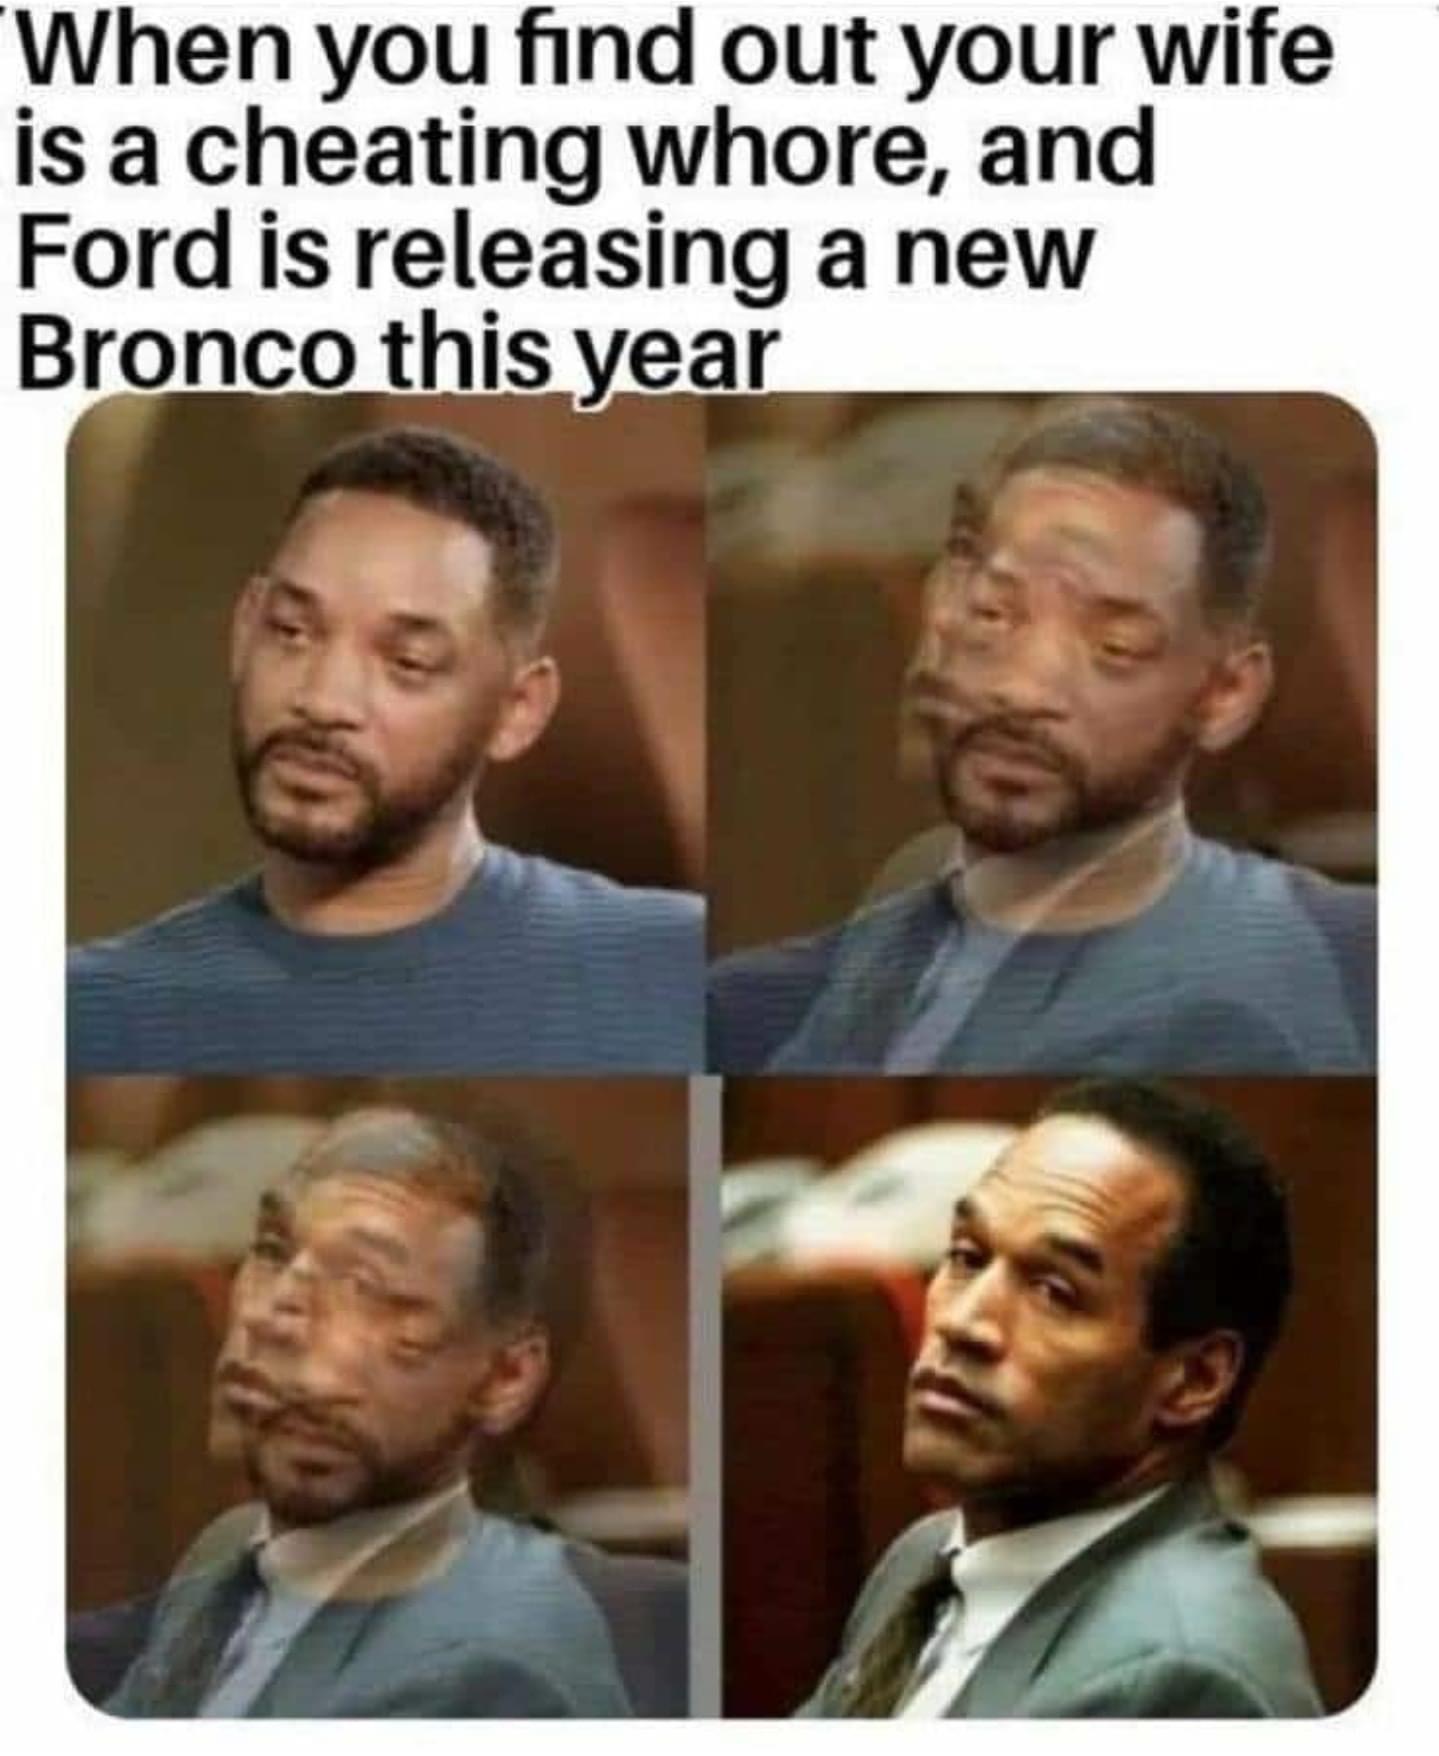 facial expression - When you find out your wife is a cheating whore, and Ford is releasing a new Bronco this year